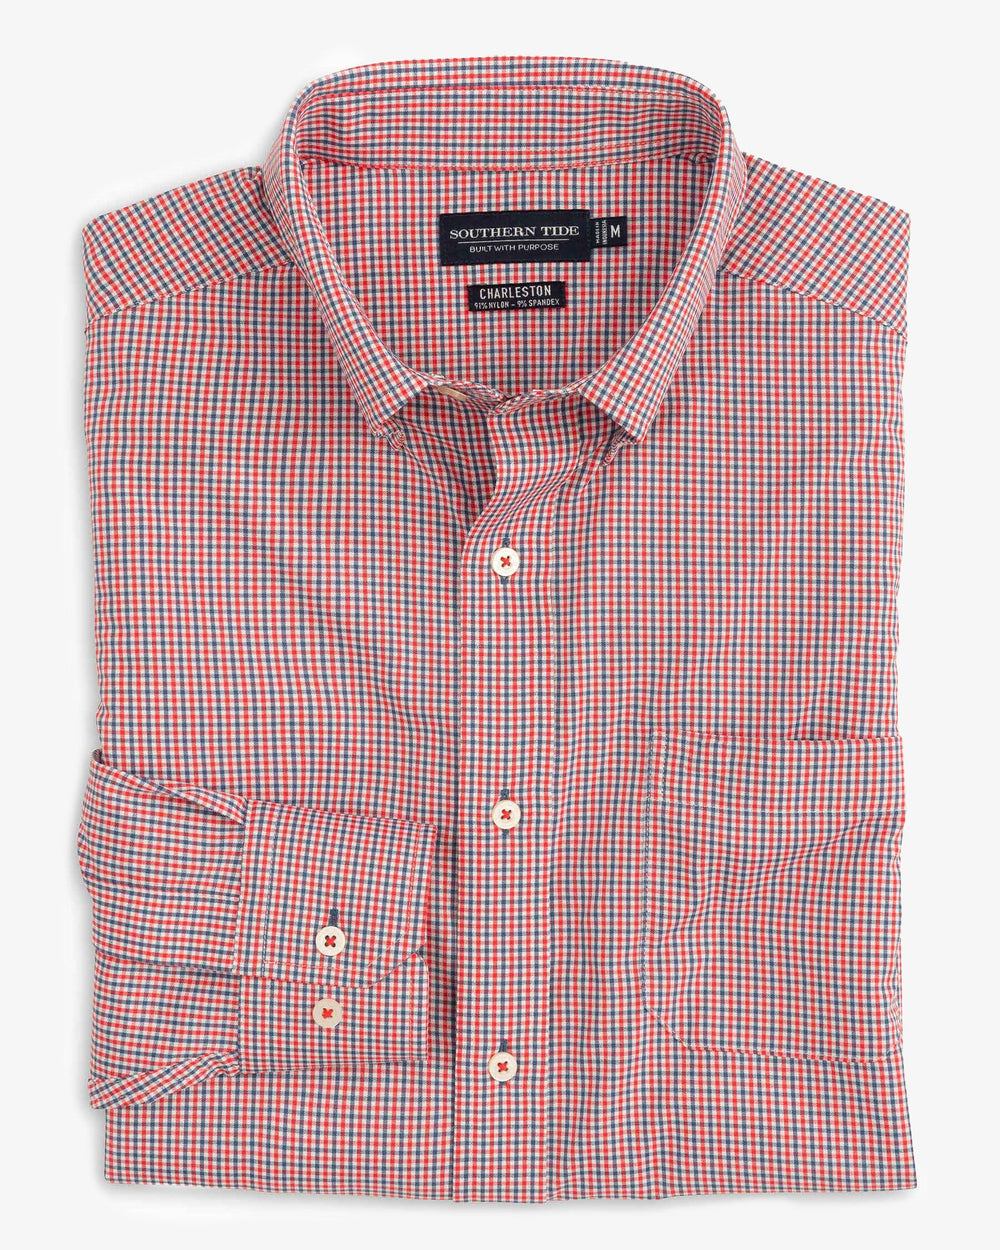 The front of the Men's Bowry Brrr Intercoastal Sport Shirt by Southern Tide - Channel Marker Red